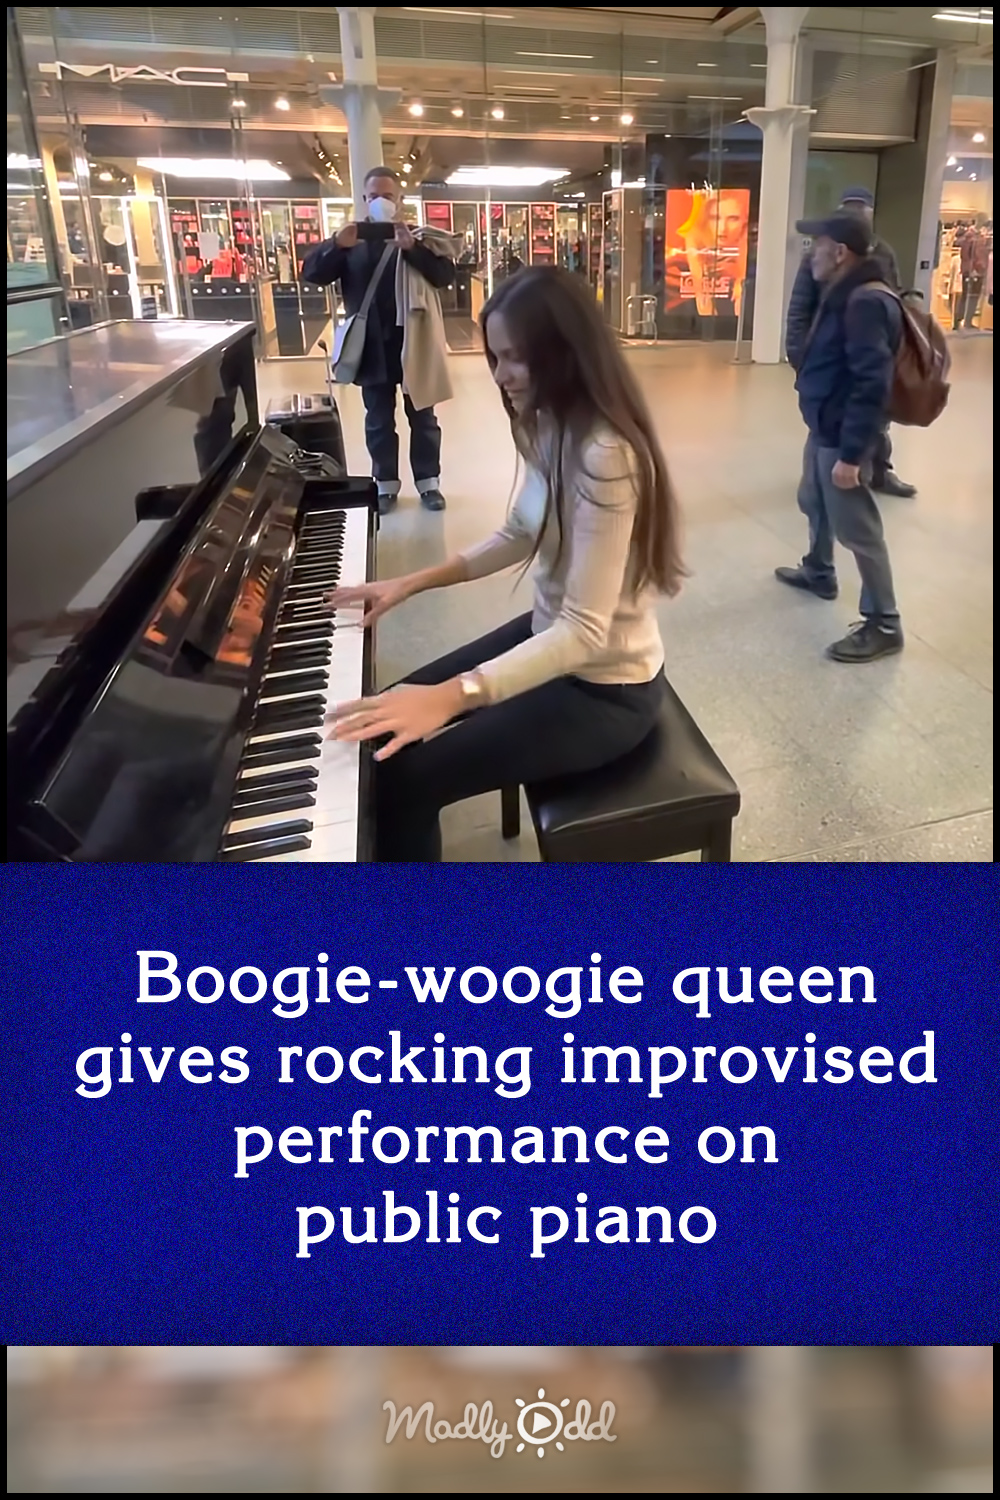 Boogie-woogie queen gives rocking improvised performance on public piano